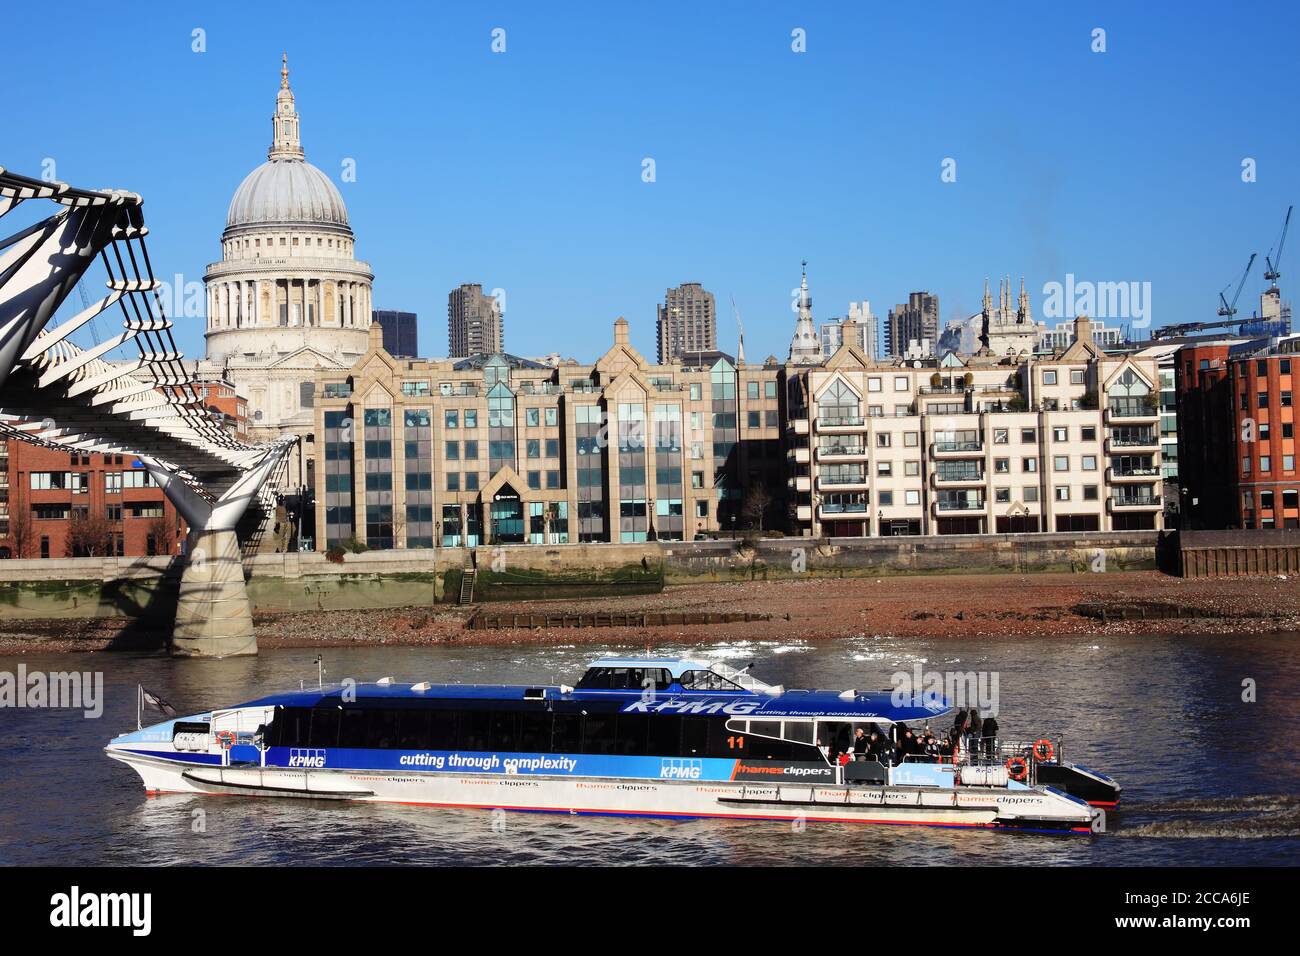 London, UK, January 14, 2012 : Thames Clipper public transport waterbus boat trip on the River Thames by St Paul's Cathedral which is a popular travel Stock Photo